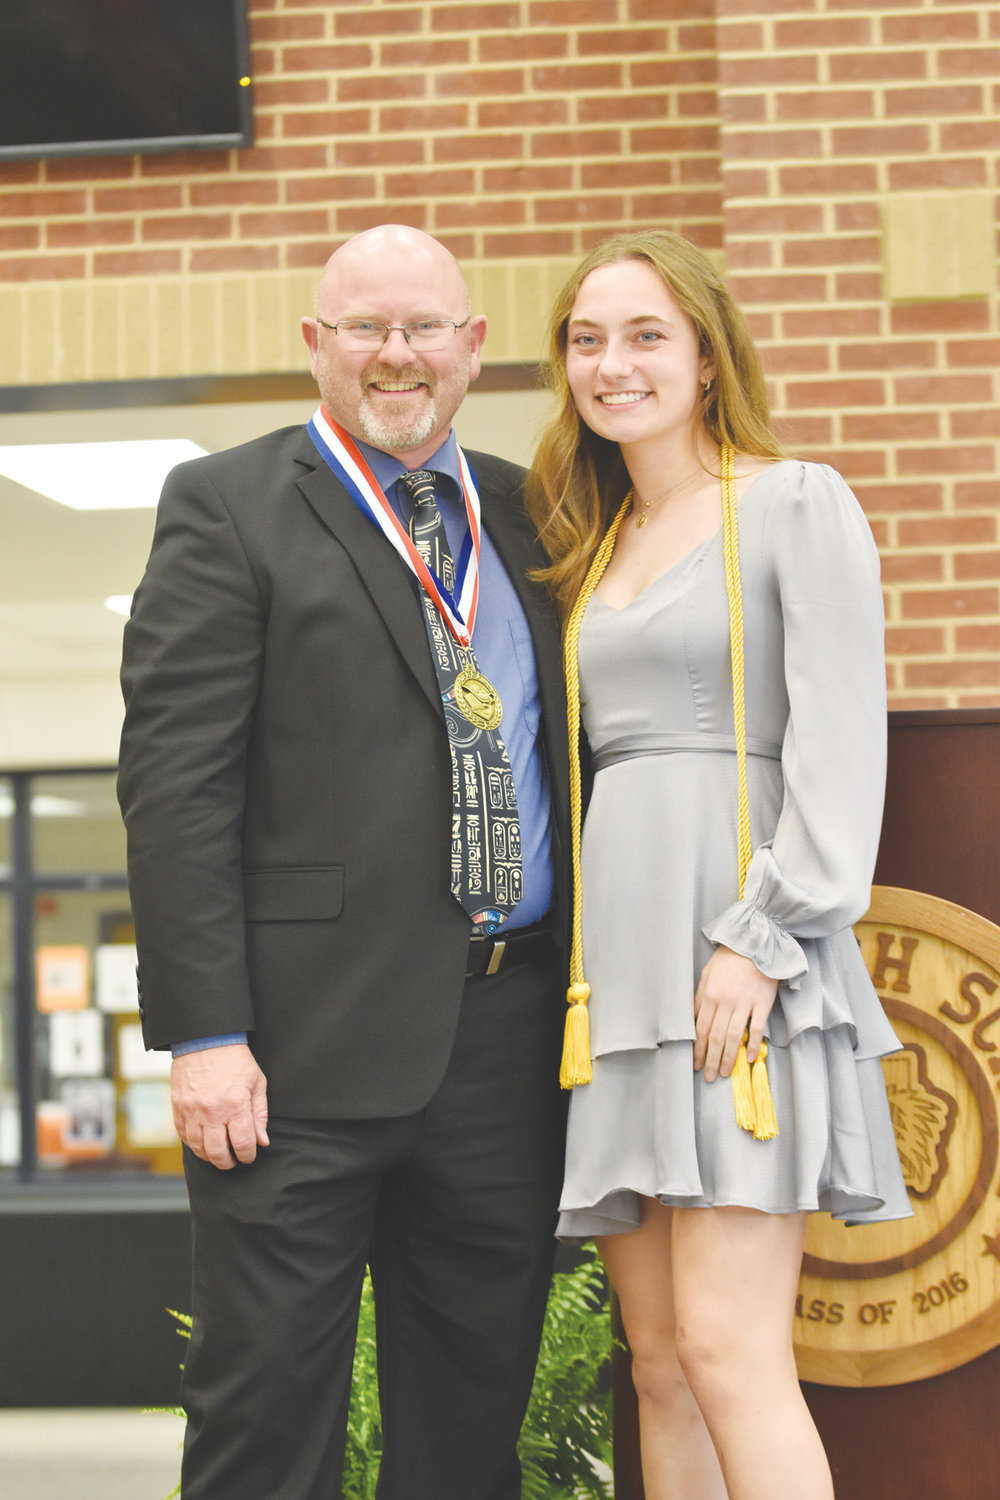 Emma Bathurst is the daughter of Mr. Lucas and Dr. Nancy Bathurst. Emma plans to attend the University of Texas at Austin in the fall. She honored Mr. Jake Albin.